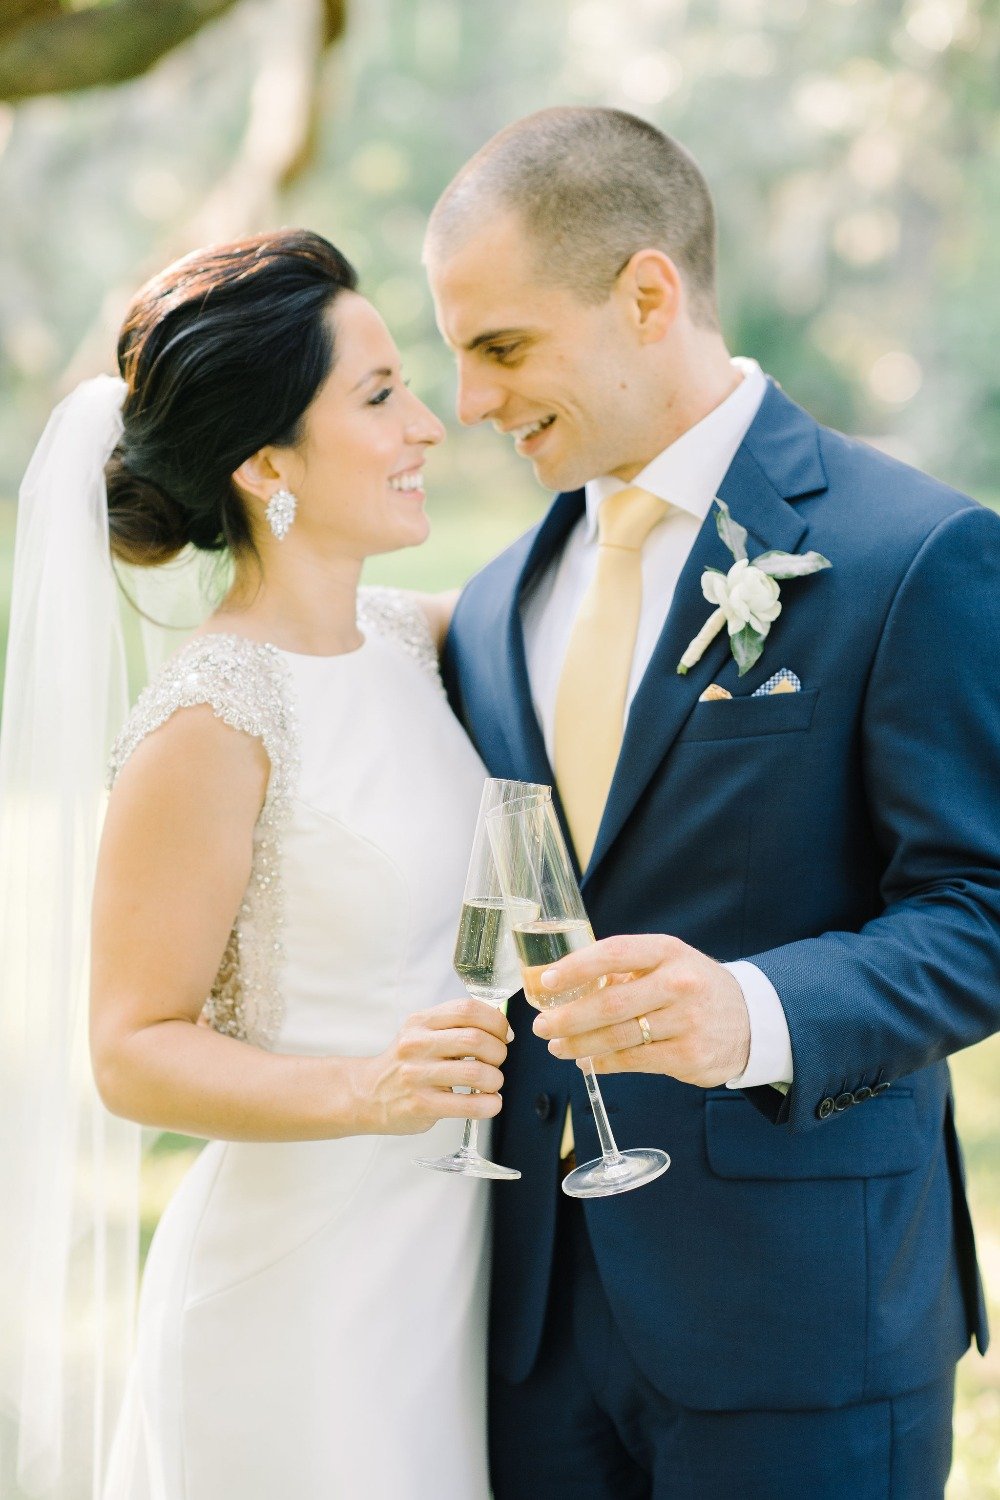 How To Have A Glamorous Wedding Day Meant For Two